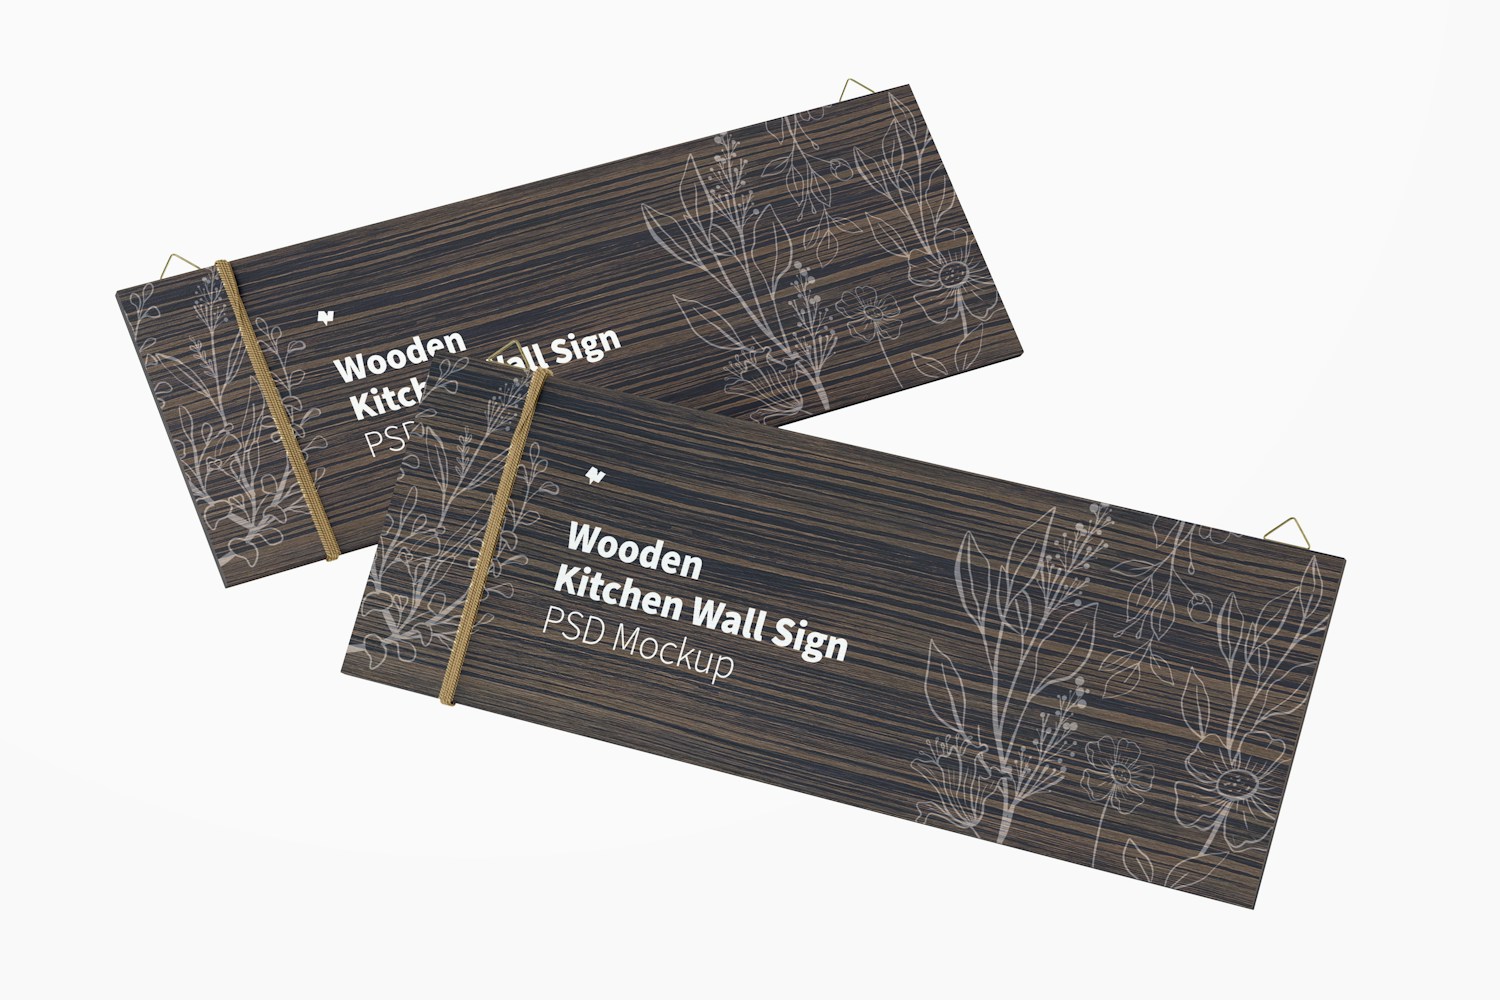 Wooden Kitchen Wall Signs Mockup, Floating